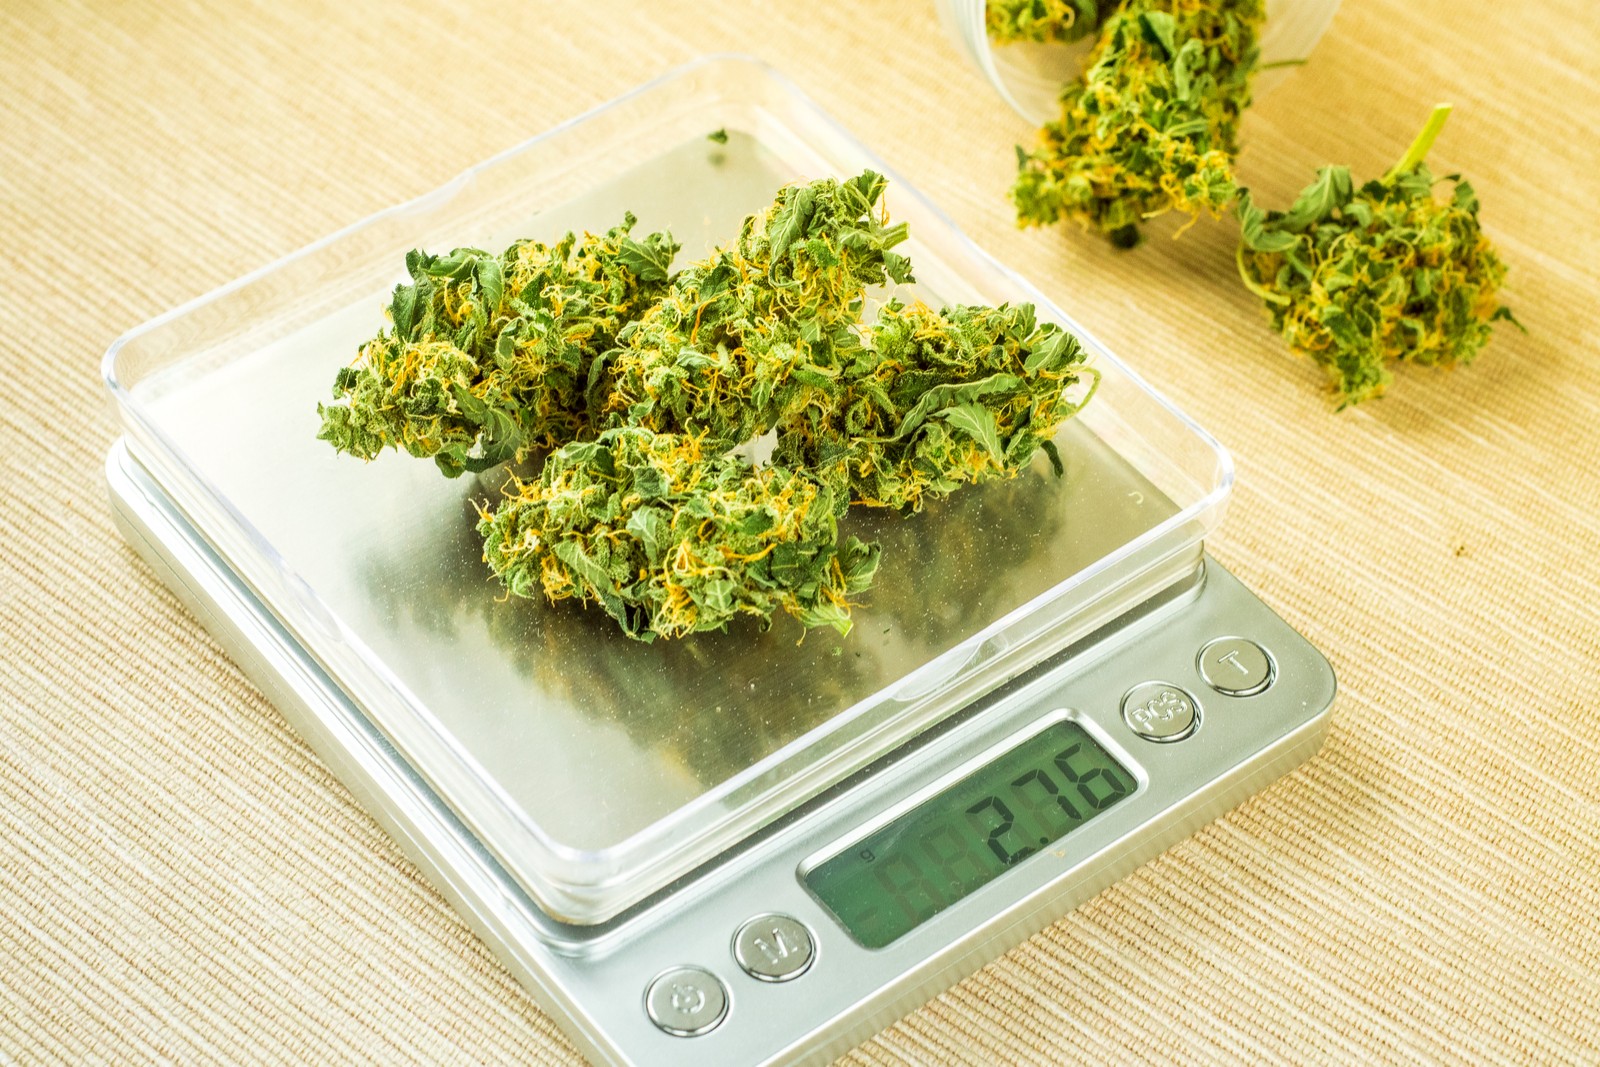 6 NTEP Certified Scales for Your Dispensary